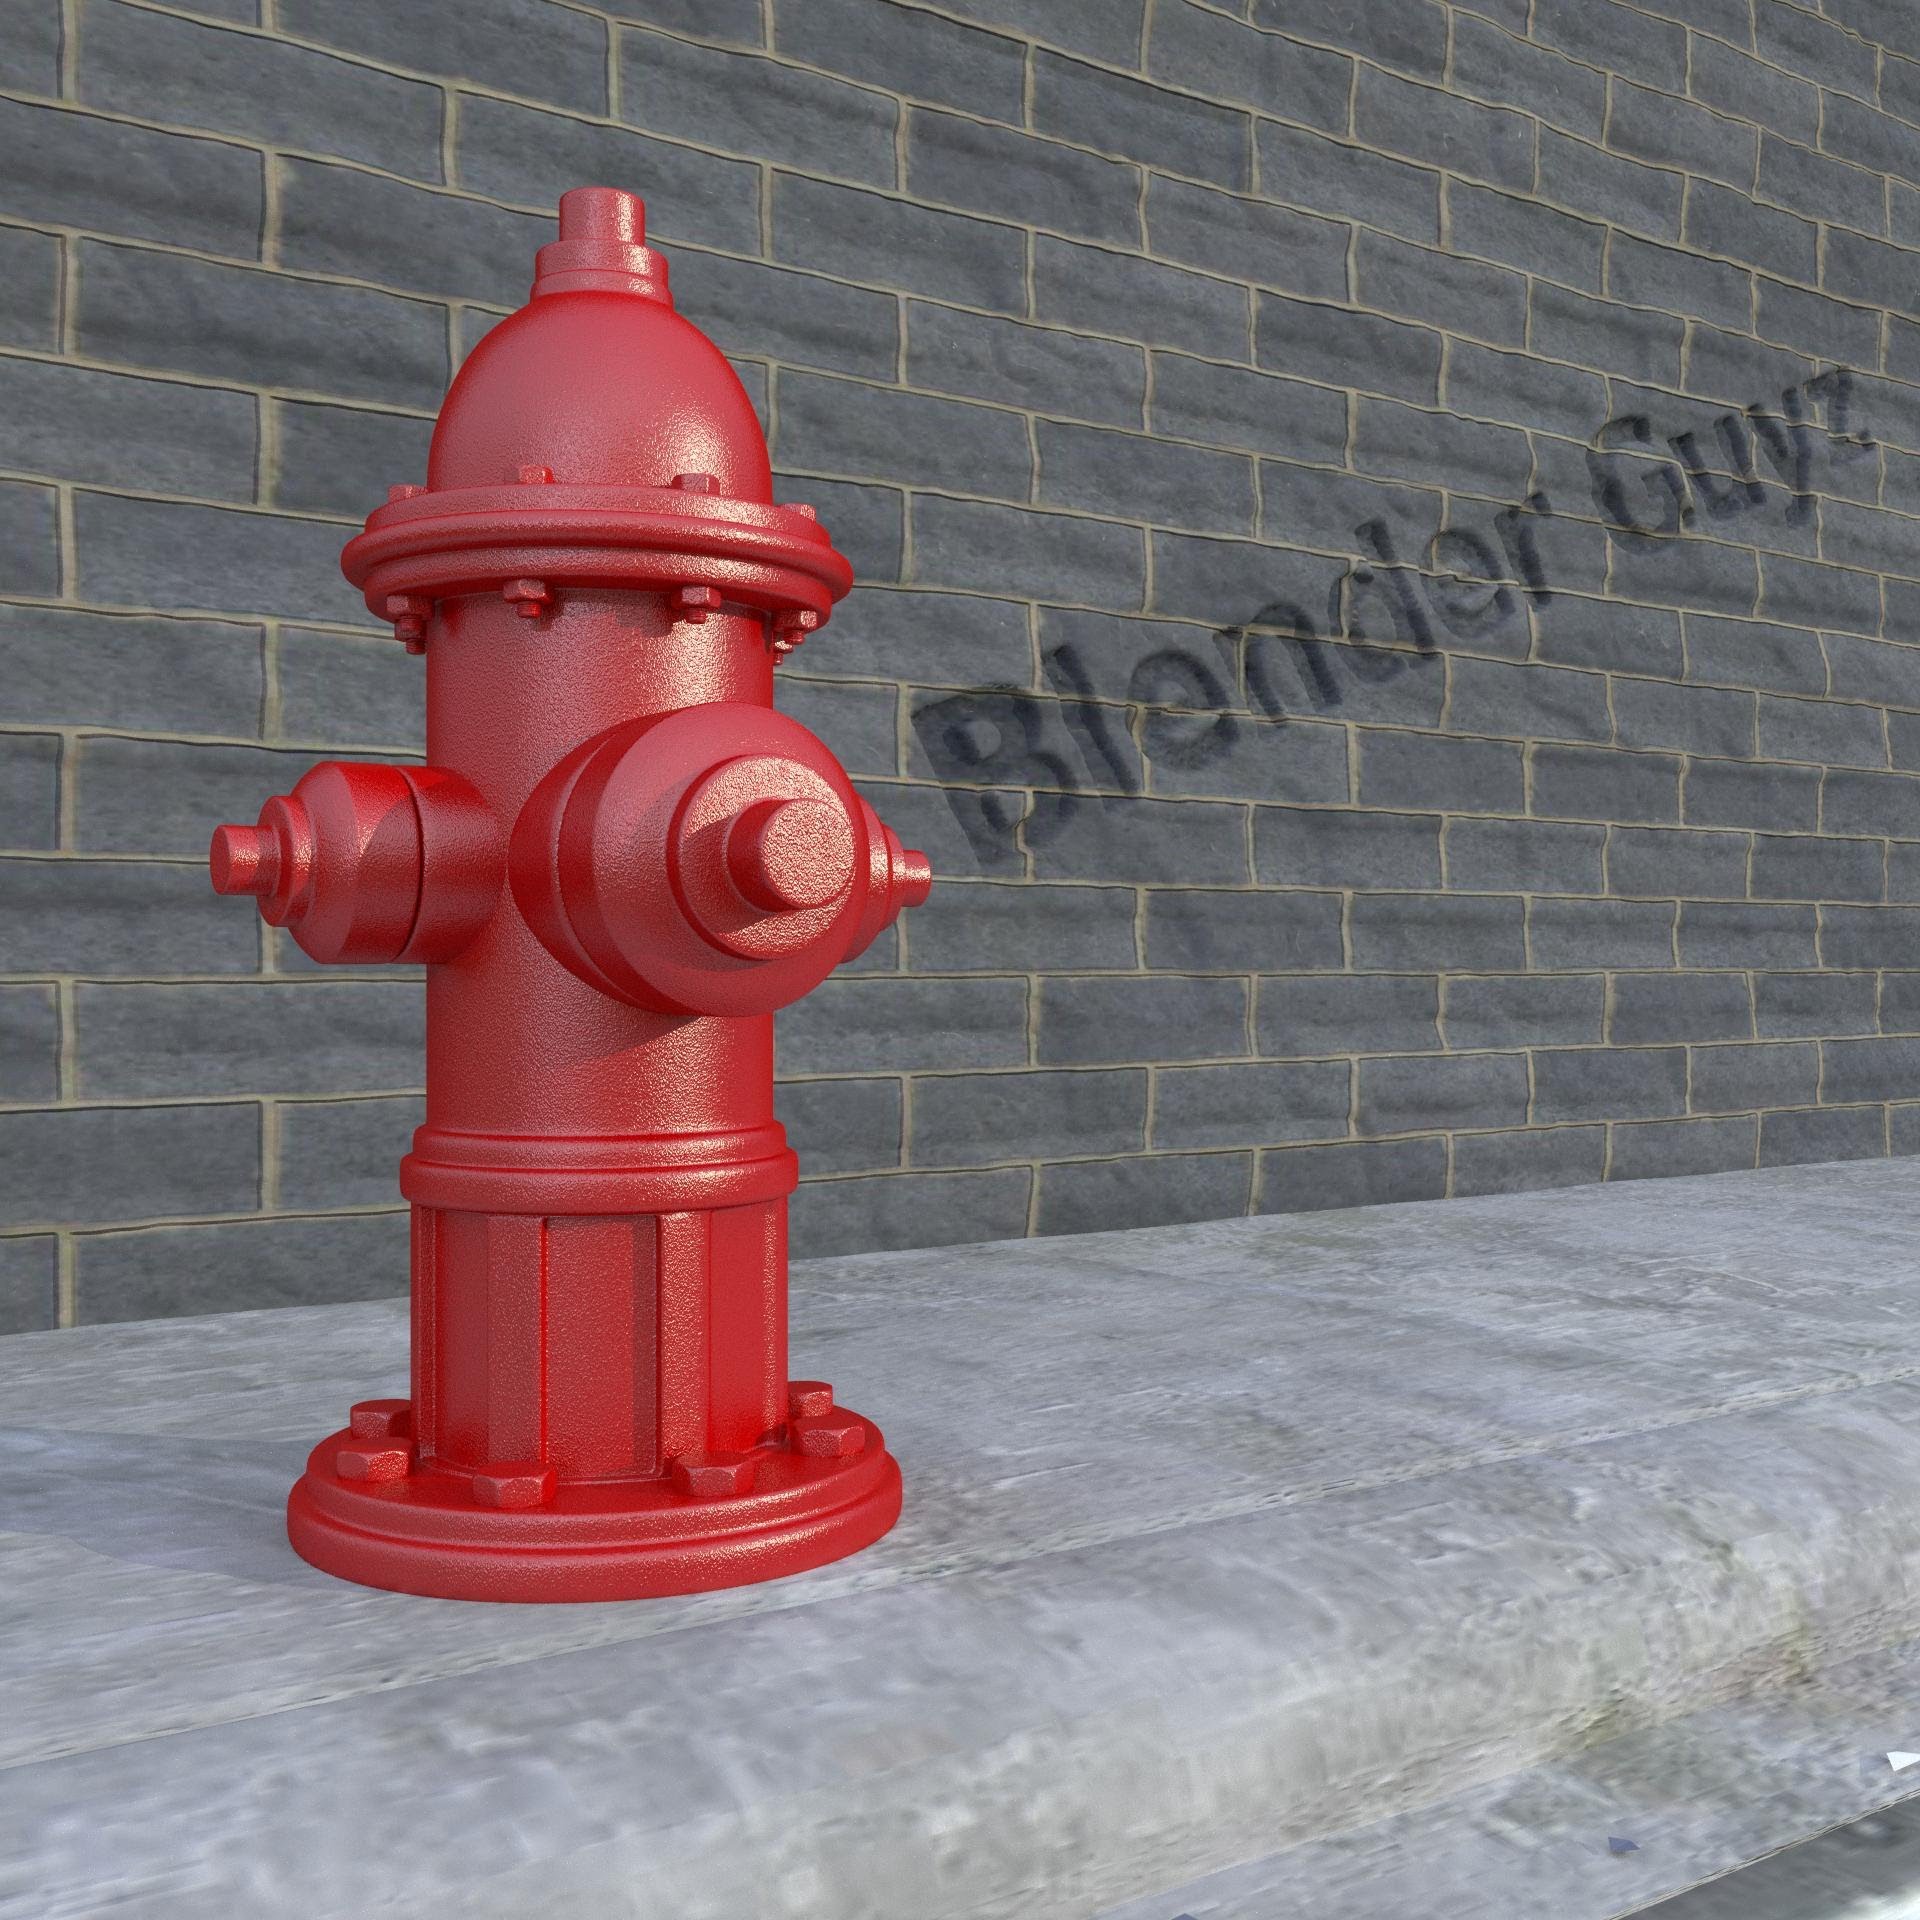 How to Create a Fire Hydrant in Blender - YouTube